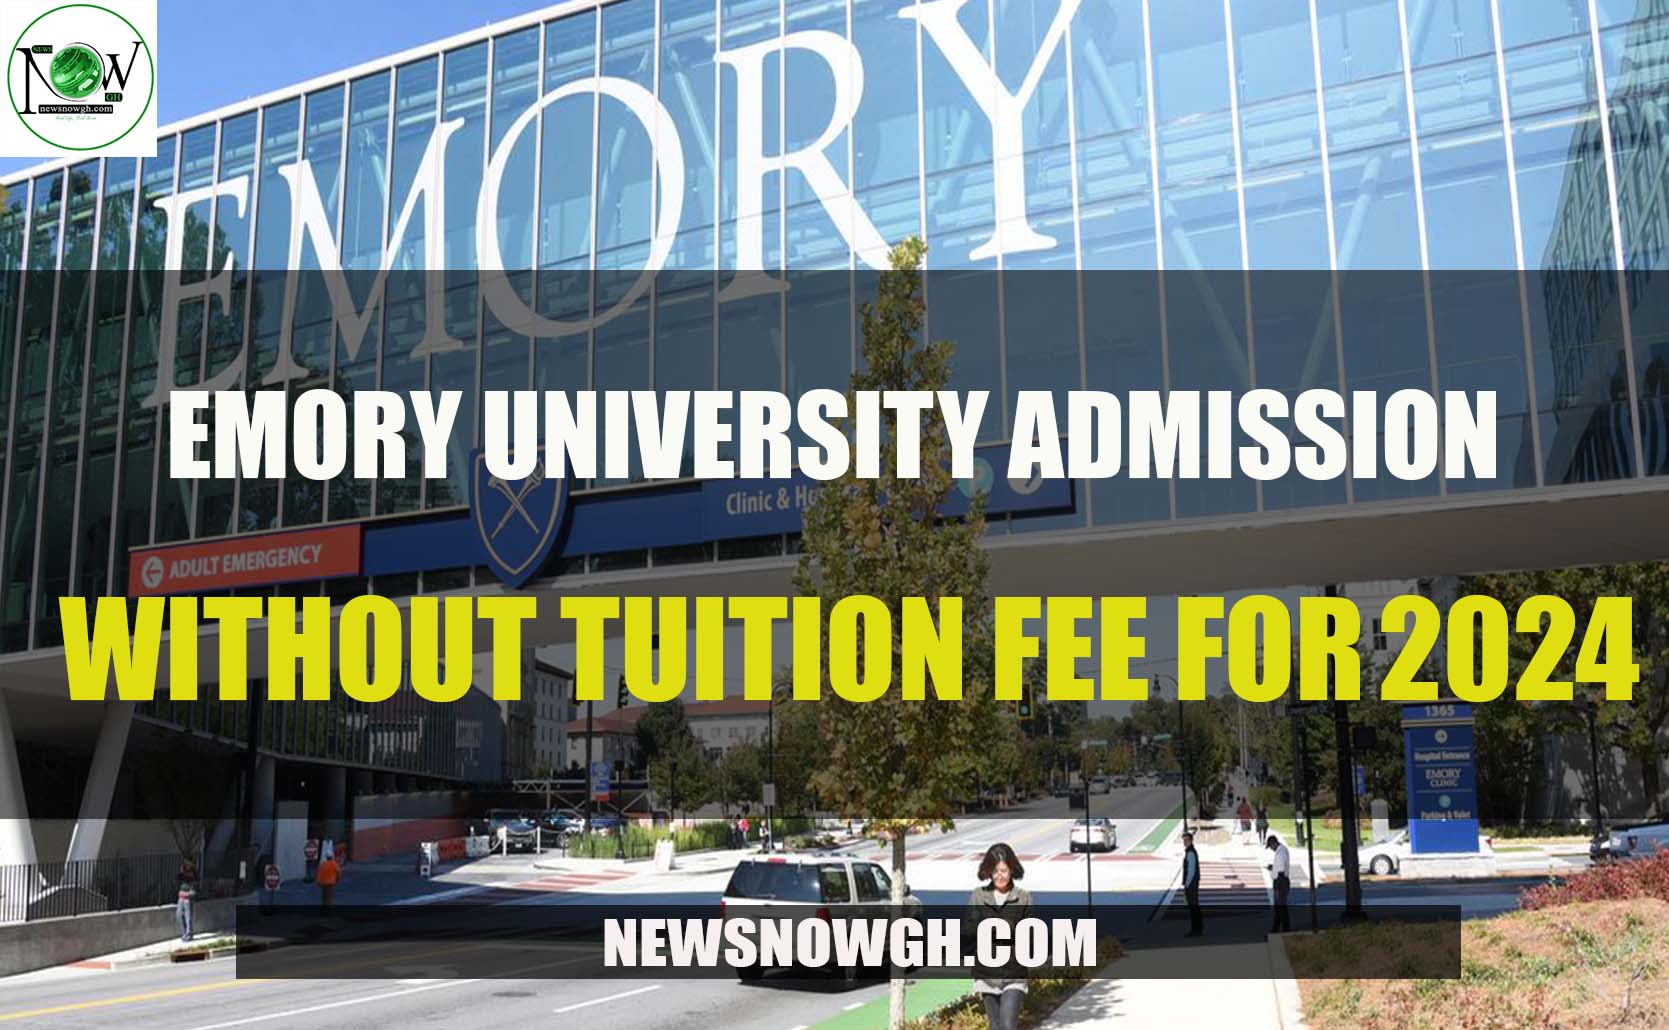 Emory University admissions without tuition fee for 202425